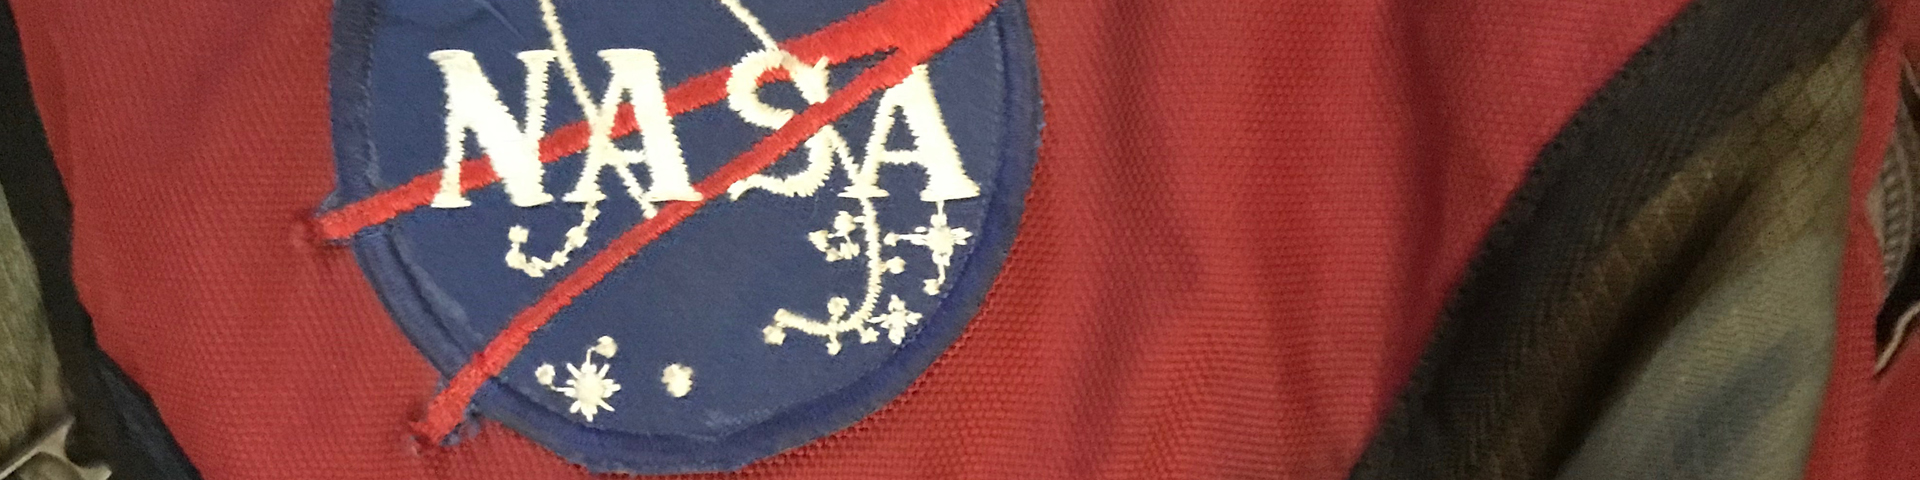 A close-up view of my old red backpack with a NASA patch on it.